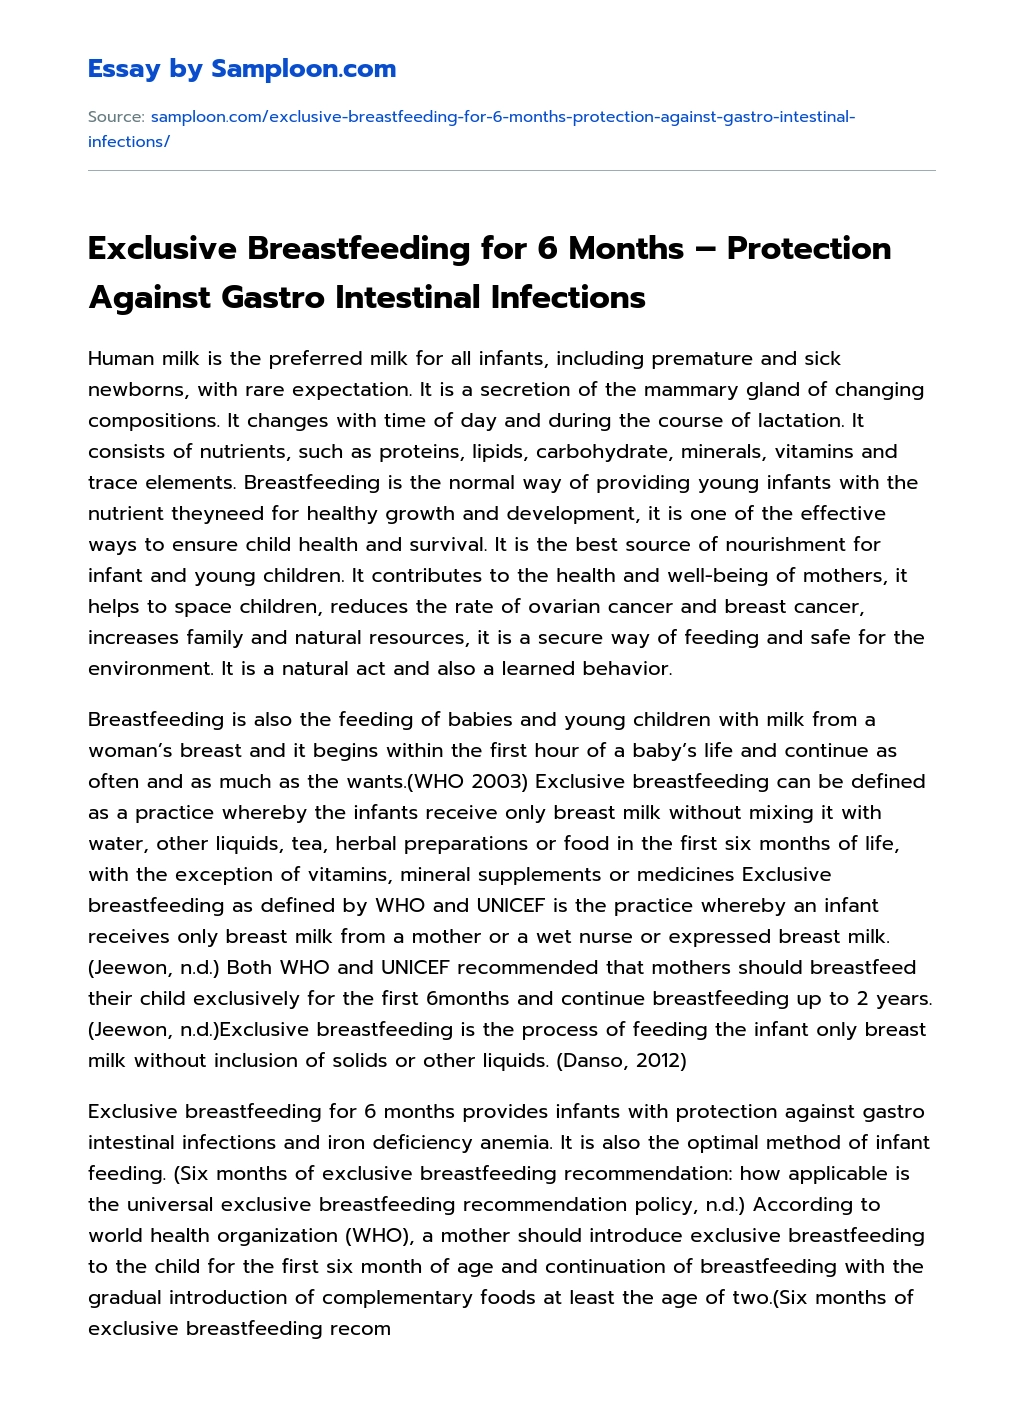 Exclusive Breastfeeding for 6 Months – Protection Against Gastro Intestinal Infections essay